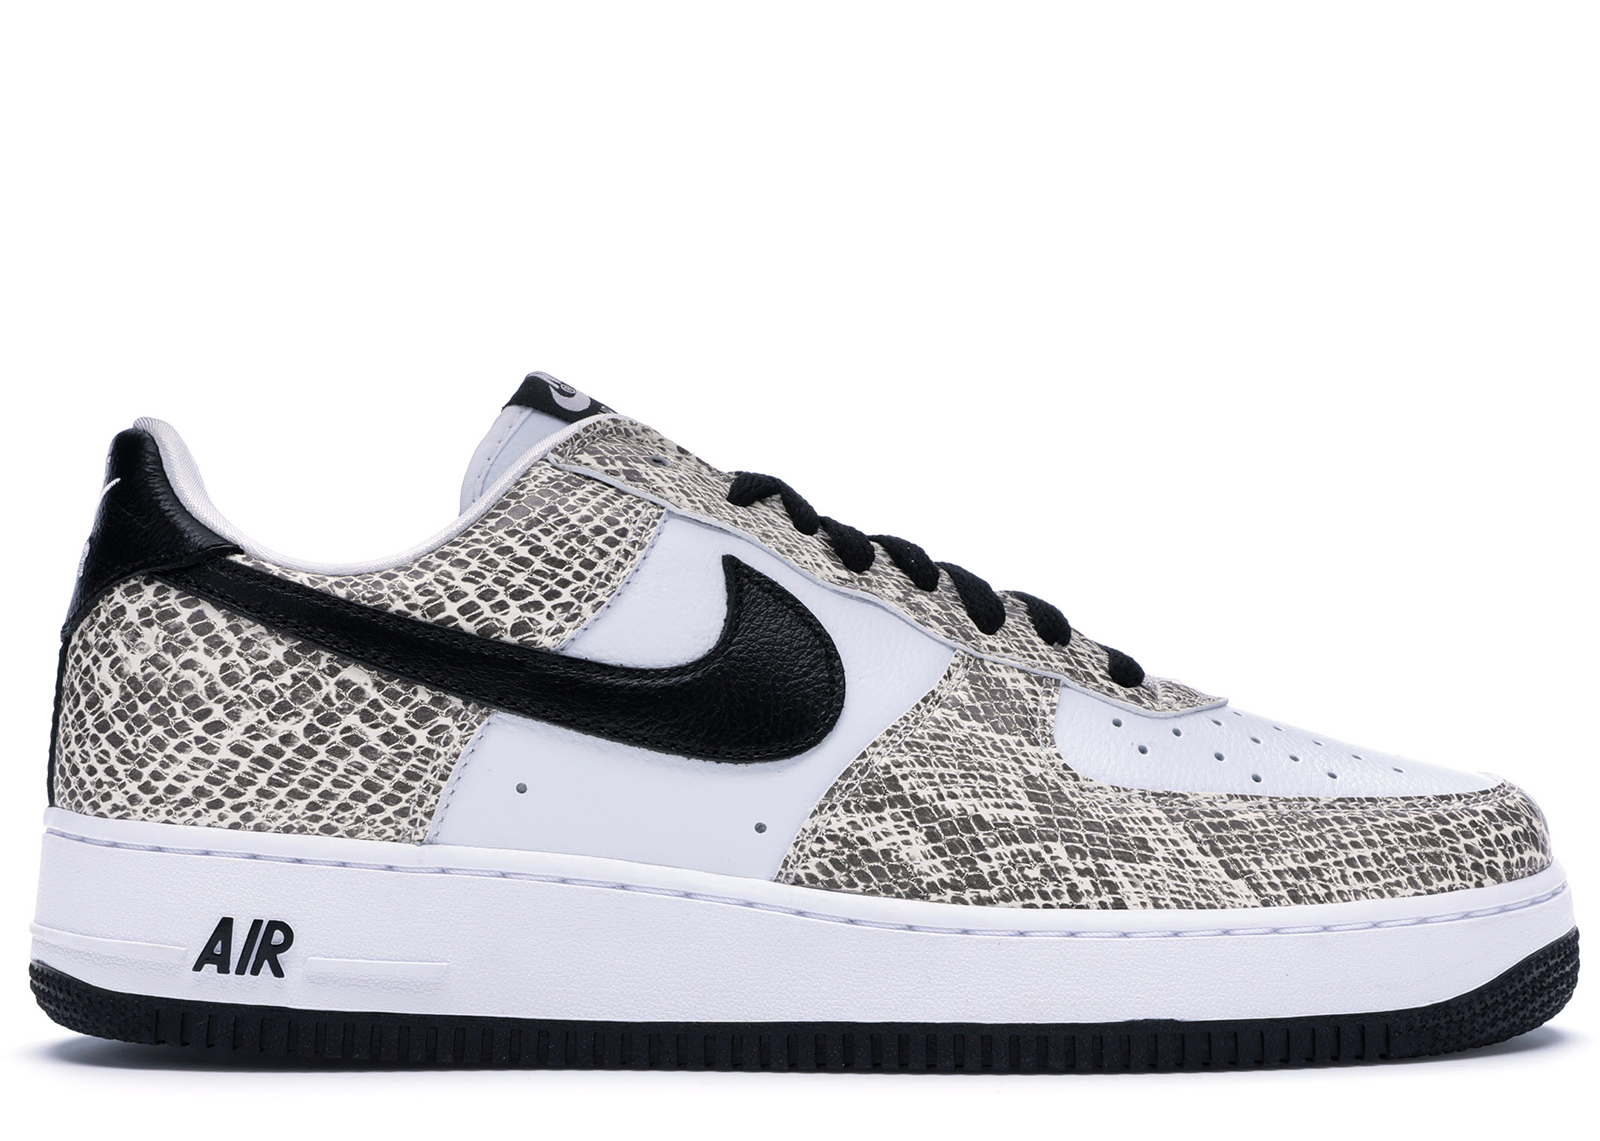 AirForce1 Low Retro Cocoa Snake (2018) - スニーカー